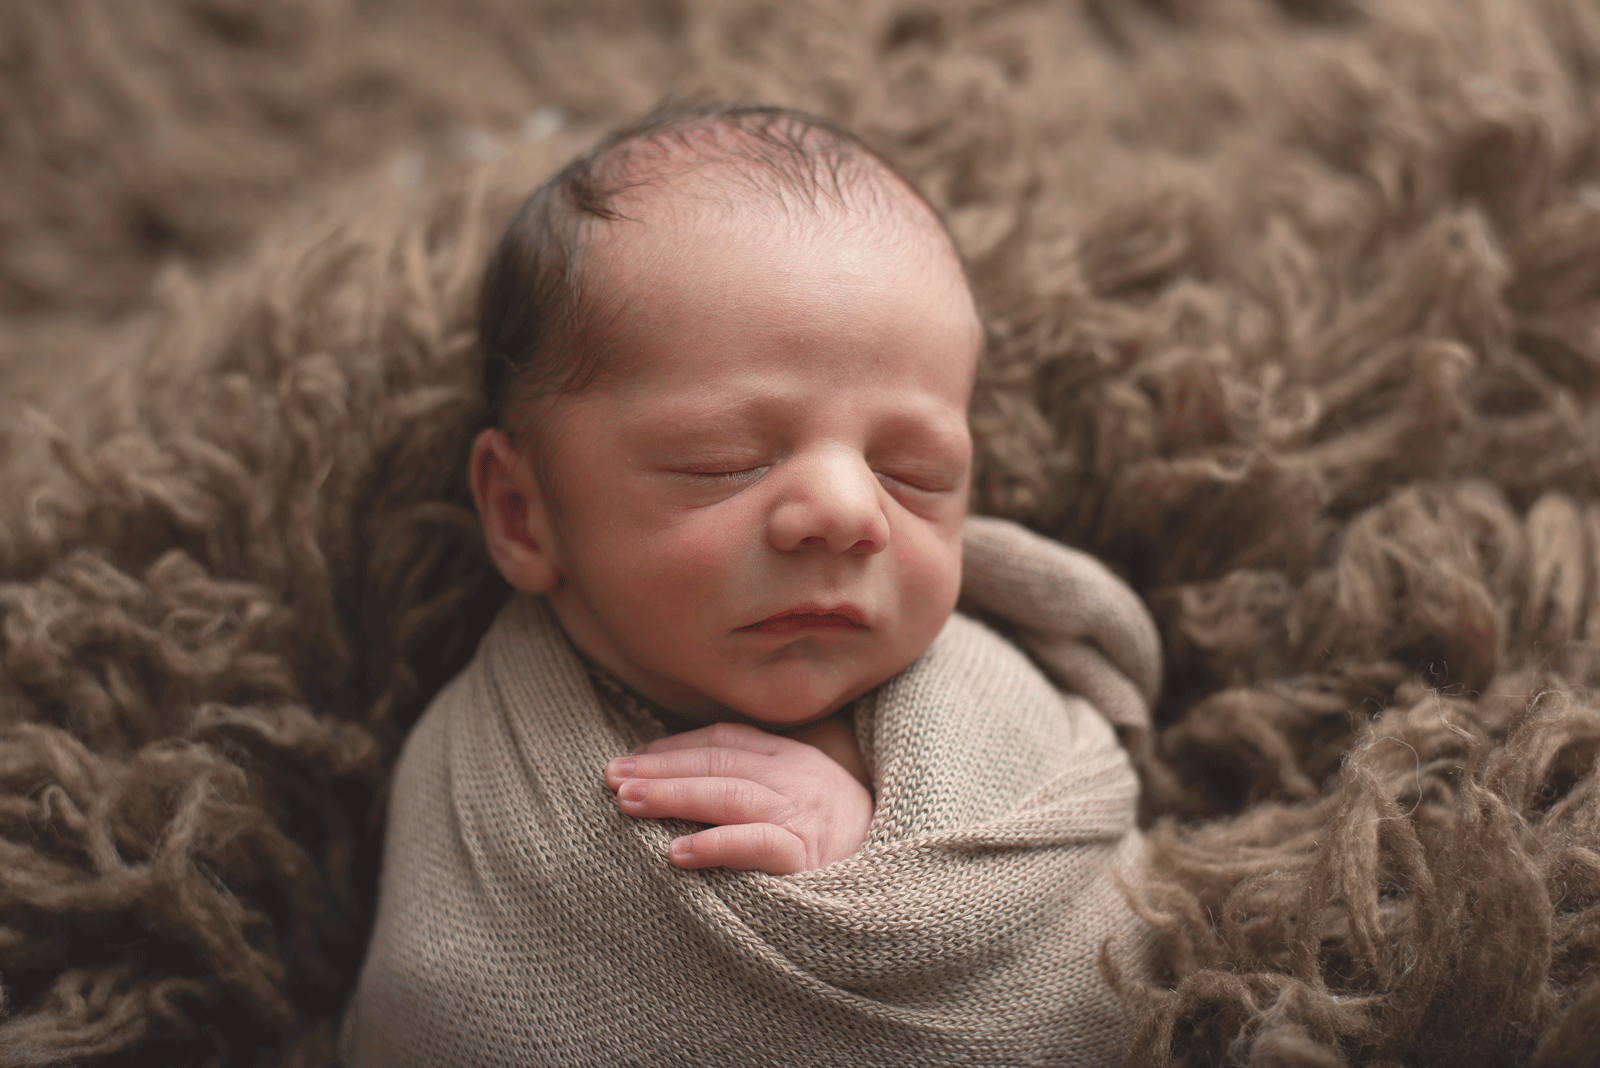 newborn baby wrapped in a neutral cloth